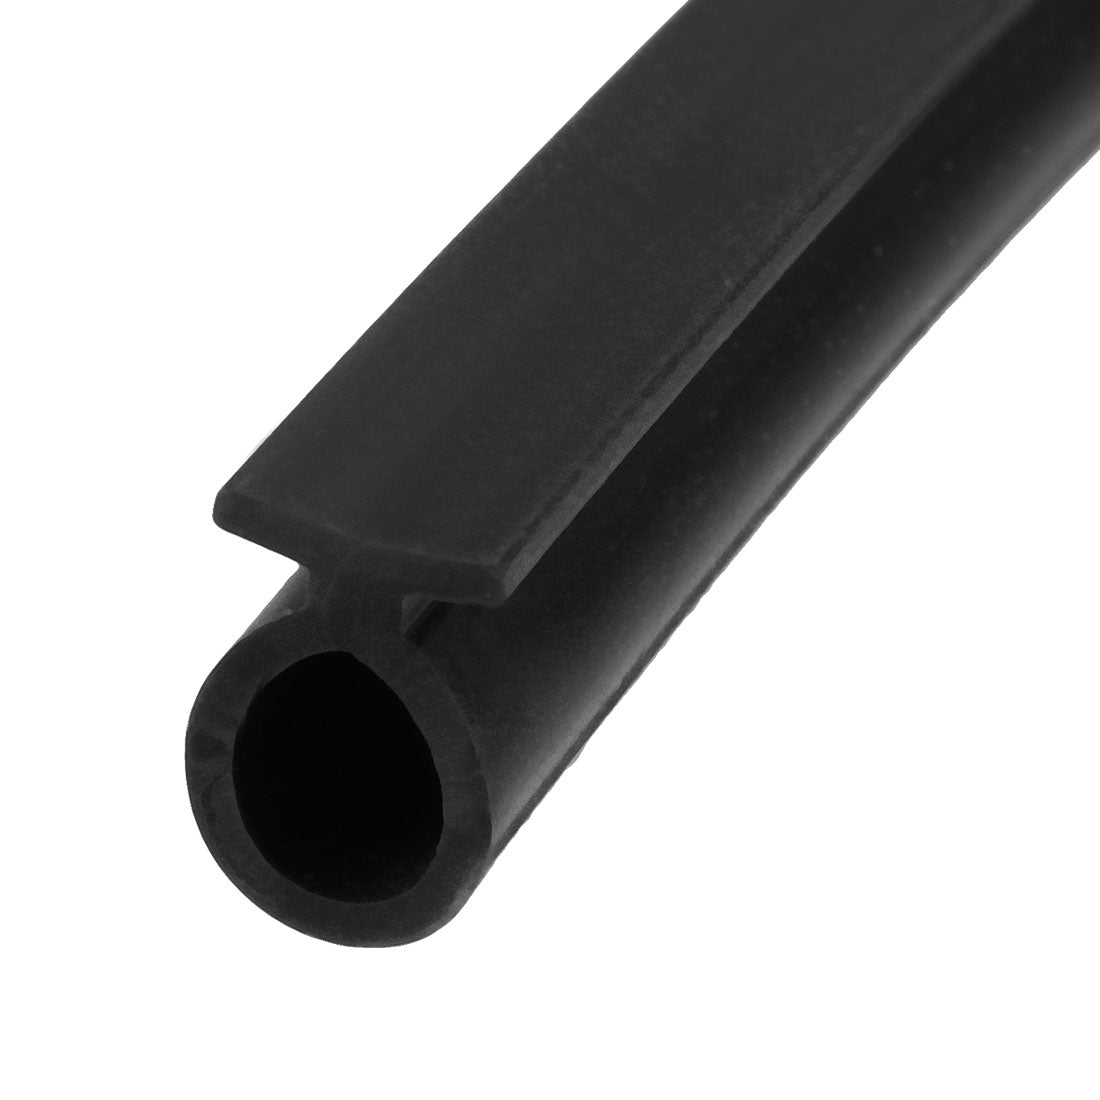 uxcell Uxcell T-Slot Mount Weatherstrip Seal 7mm Bulb Bubble for 6mm Slot 5 Meters Black